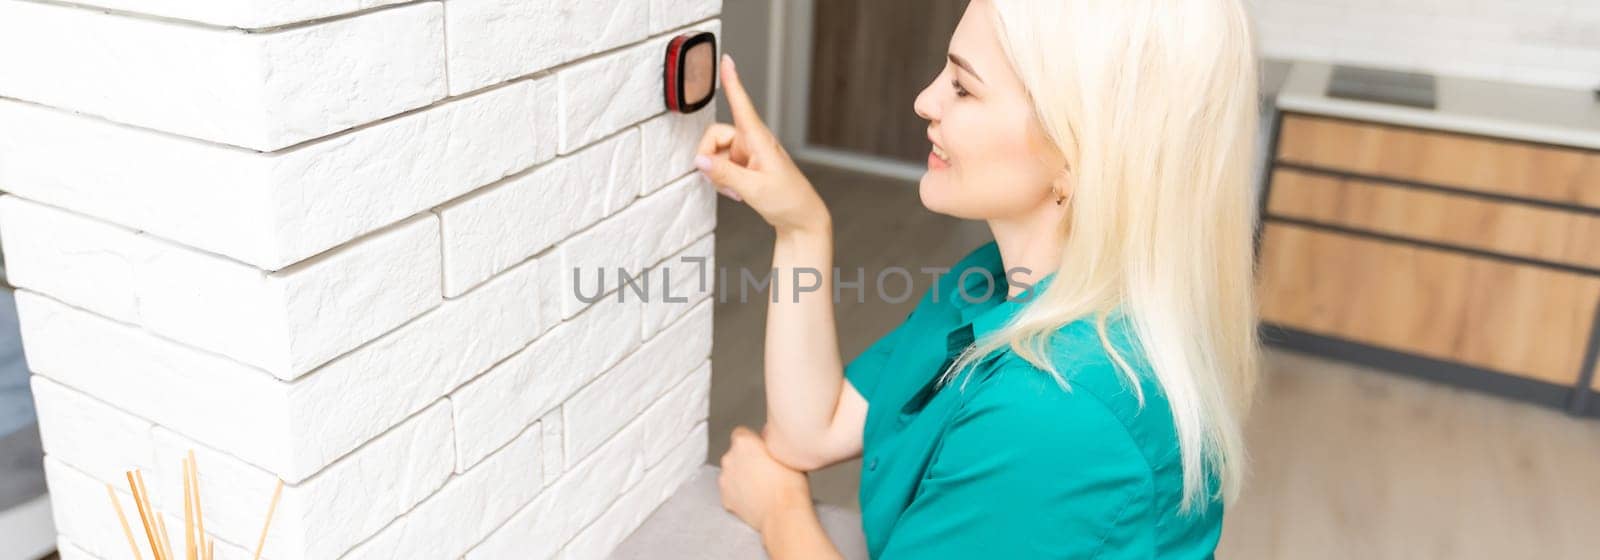 Close Up Of Woman Adjusting Wall Mounted Digital Central Heating Thermostat Control At Home by Andelov13